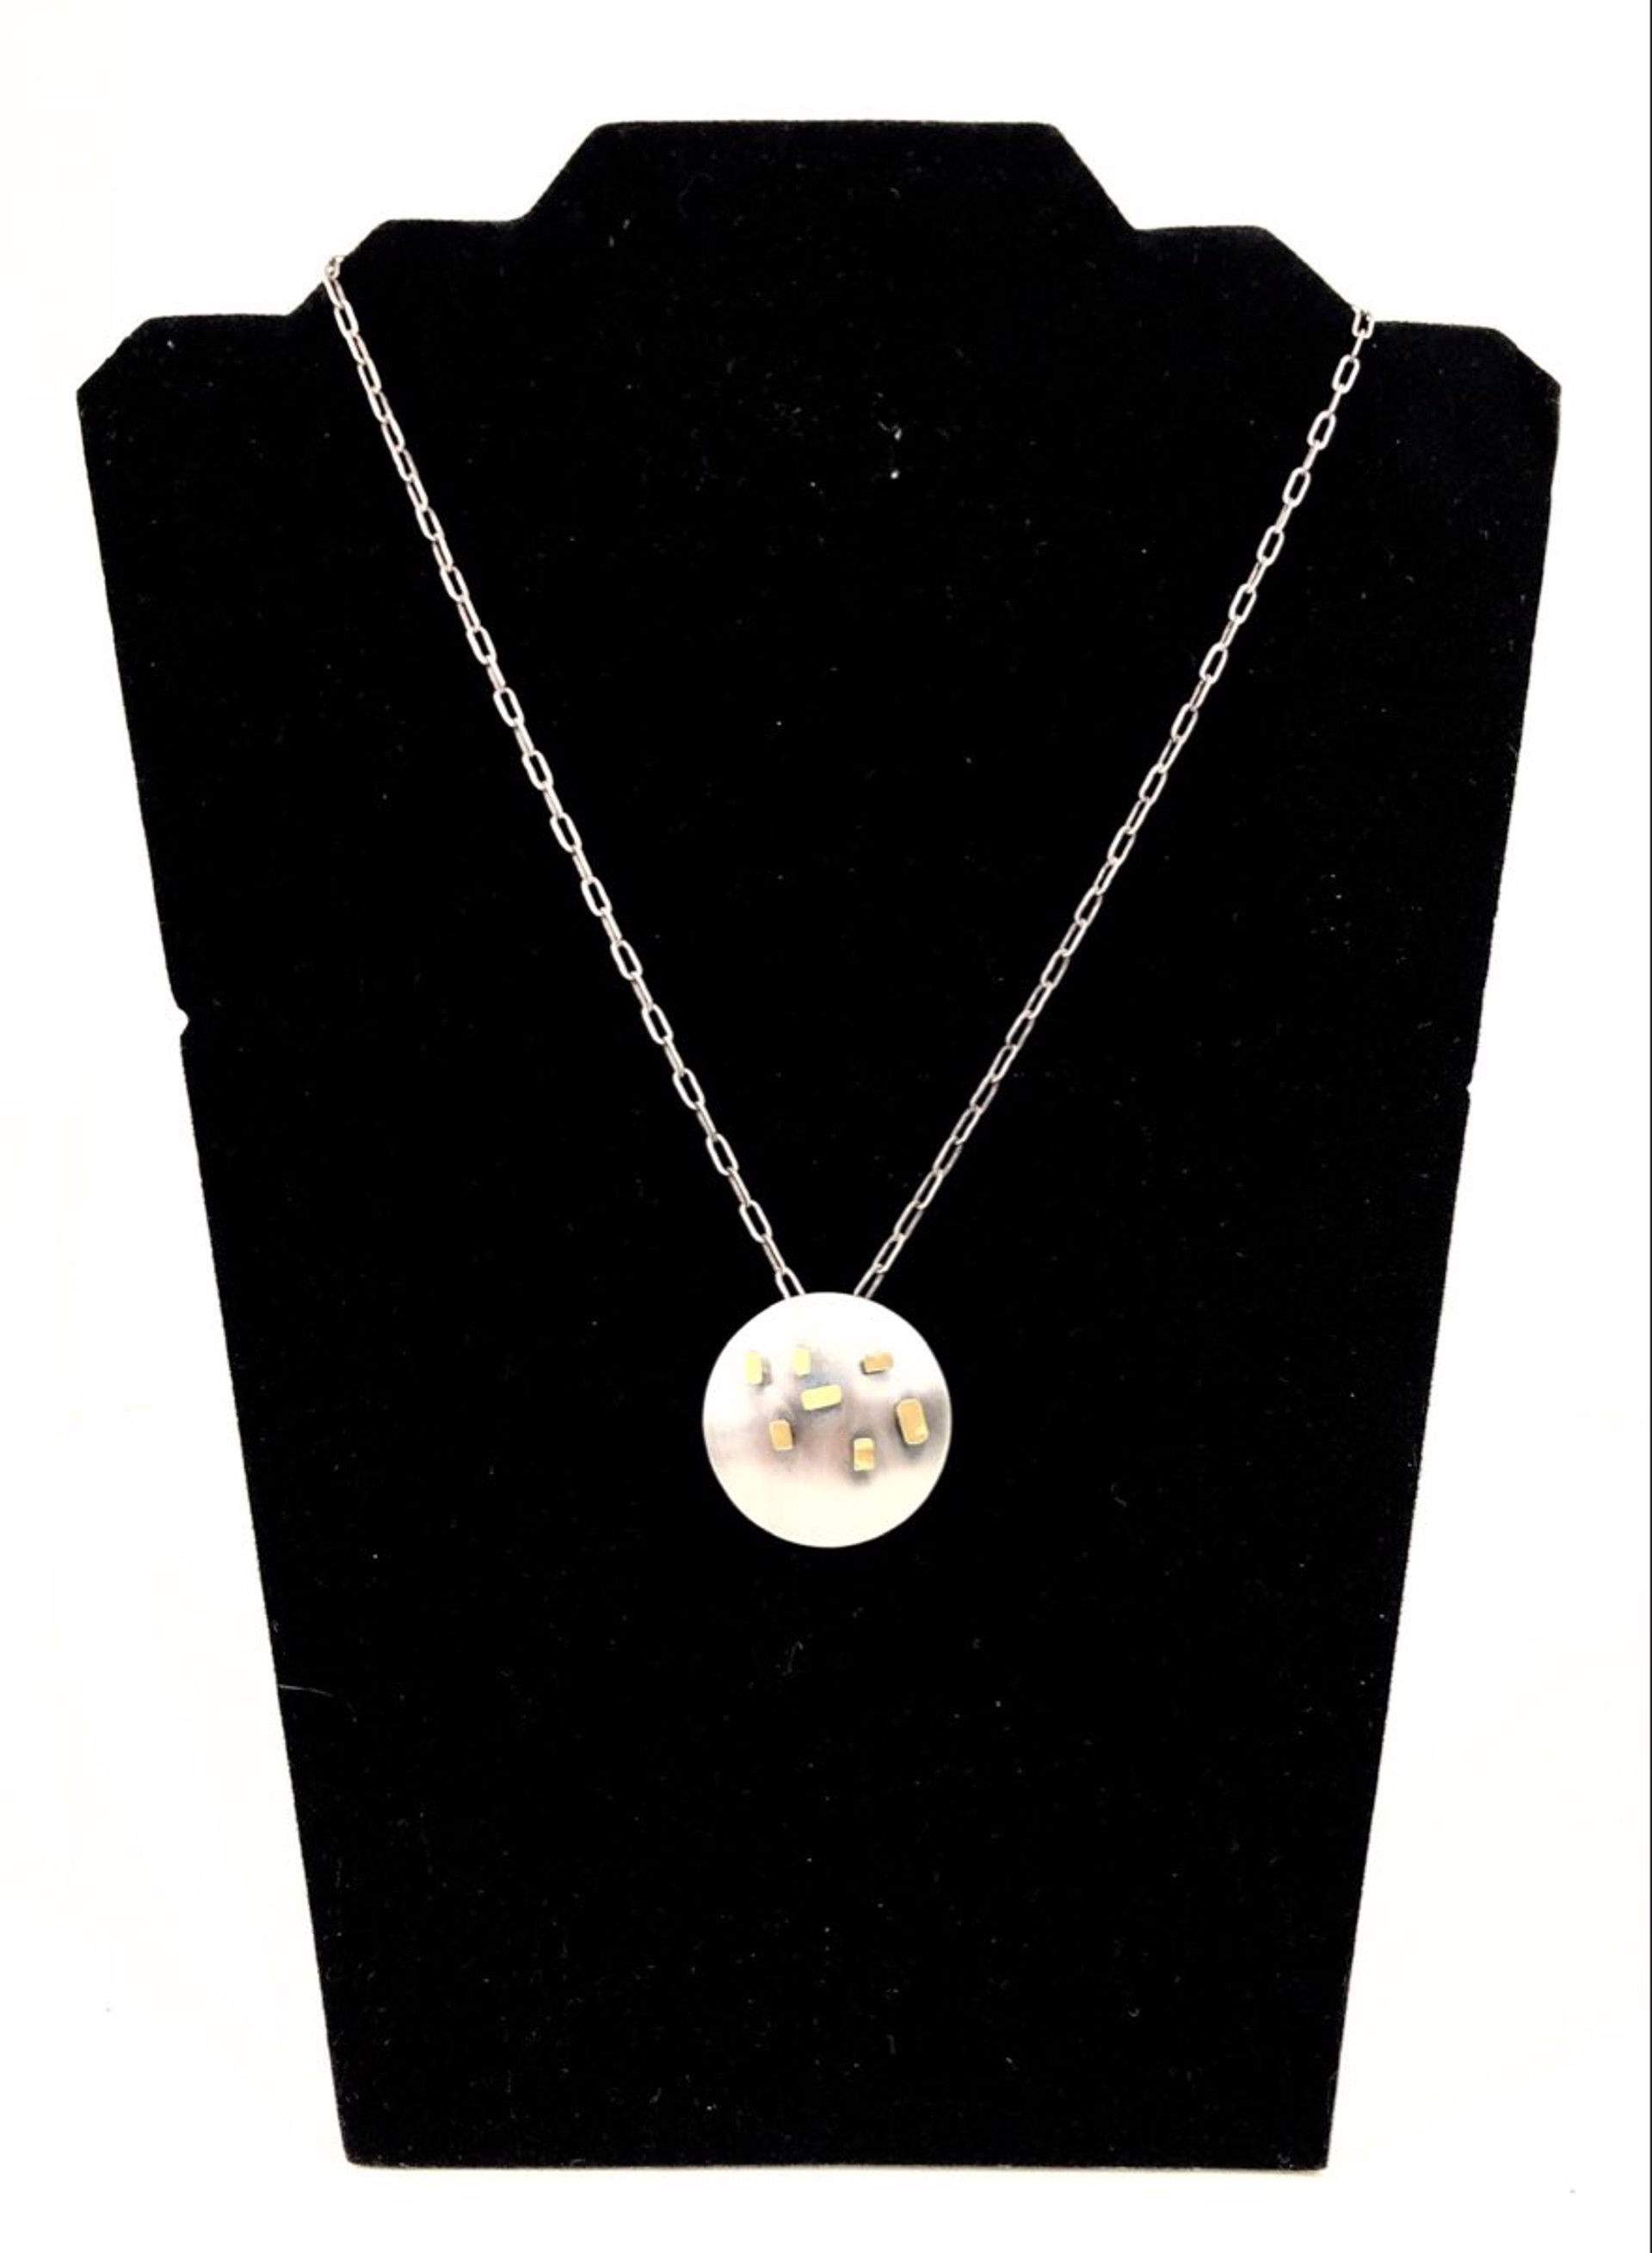 Blocks Pendant with Silver Chain by Theresa St. Romain